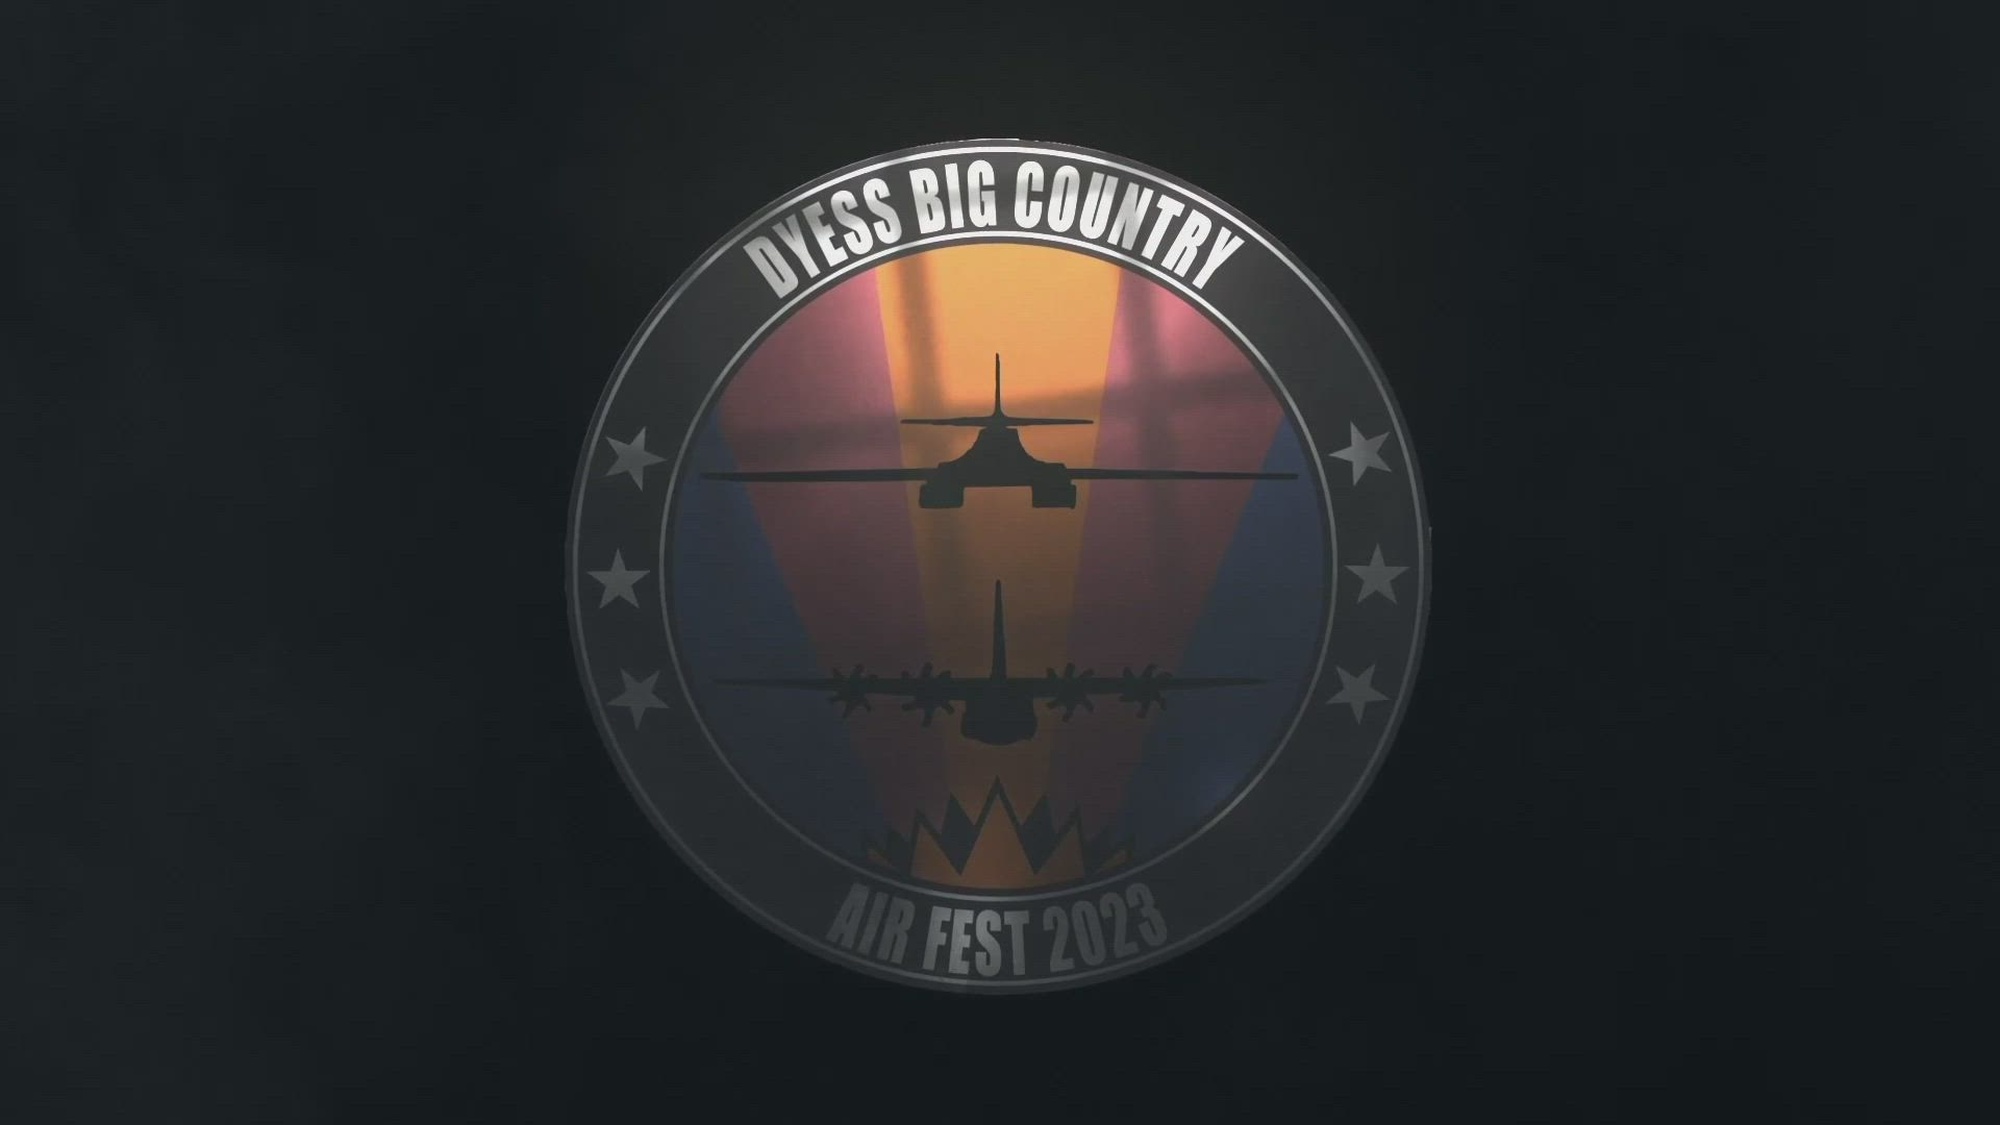 The Dyess Big Country Air Fest features a wide array of aerial performers available for the public. The Air Fest takes place on April 22, 2023.